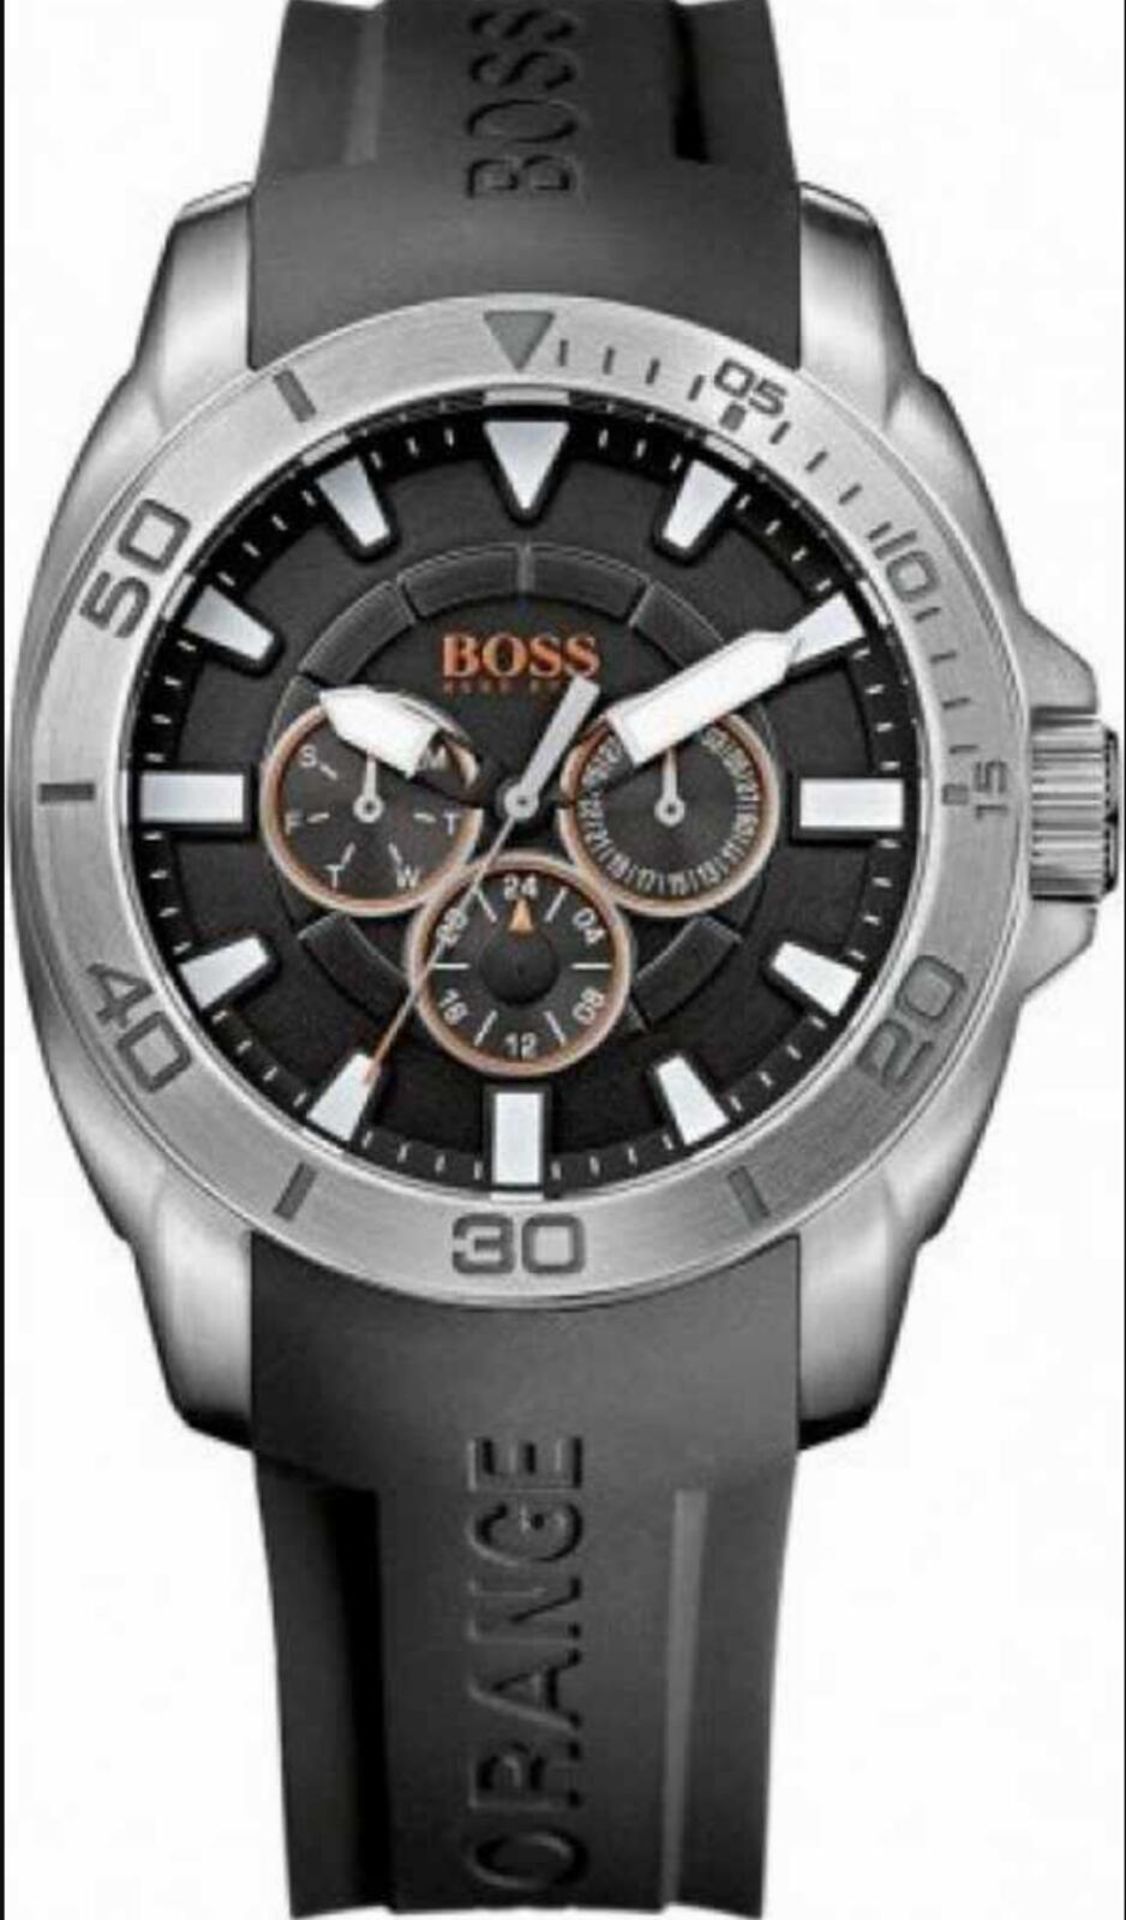 BRAND NEW HUGO BOSS 1512950, GENTS DESIGNER CHRONOGRAPH WATCH WITH ORIGINAL BOX AND BOOKLET - RRP £ - Image 2 of 2